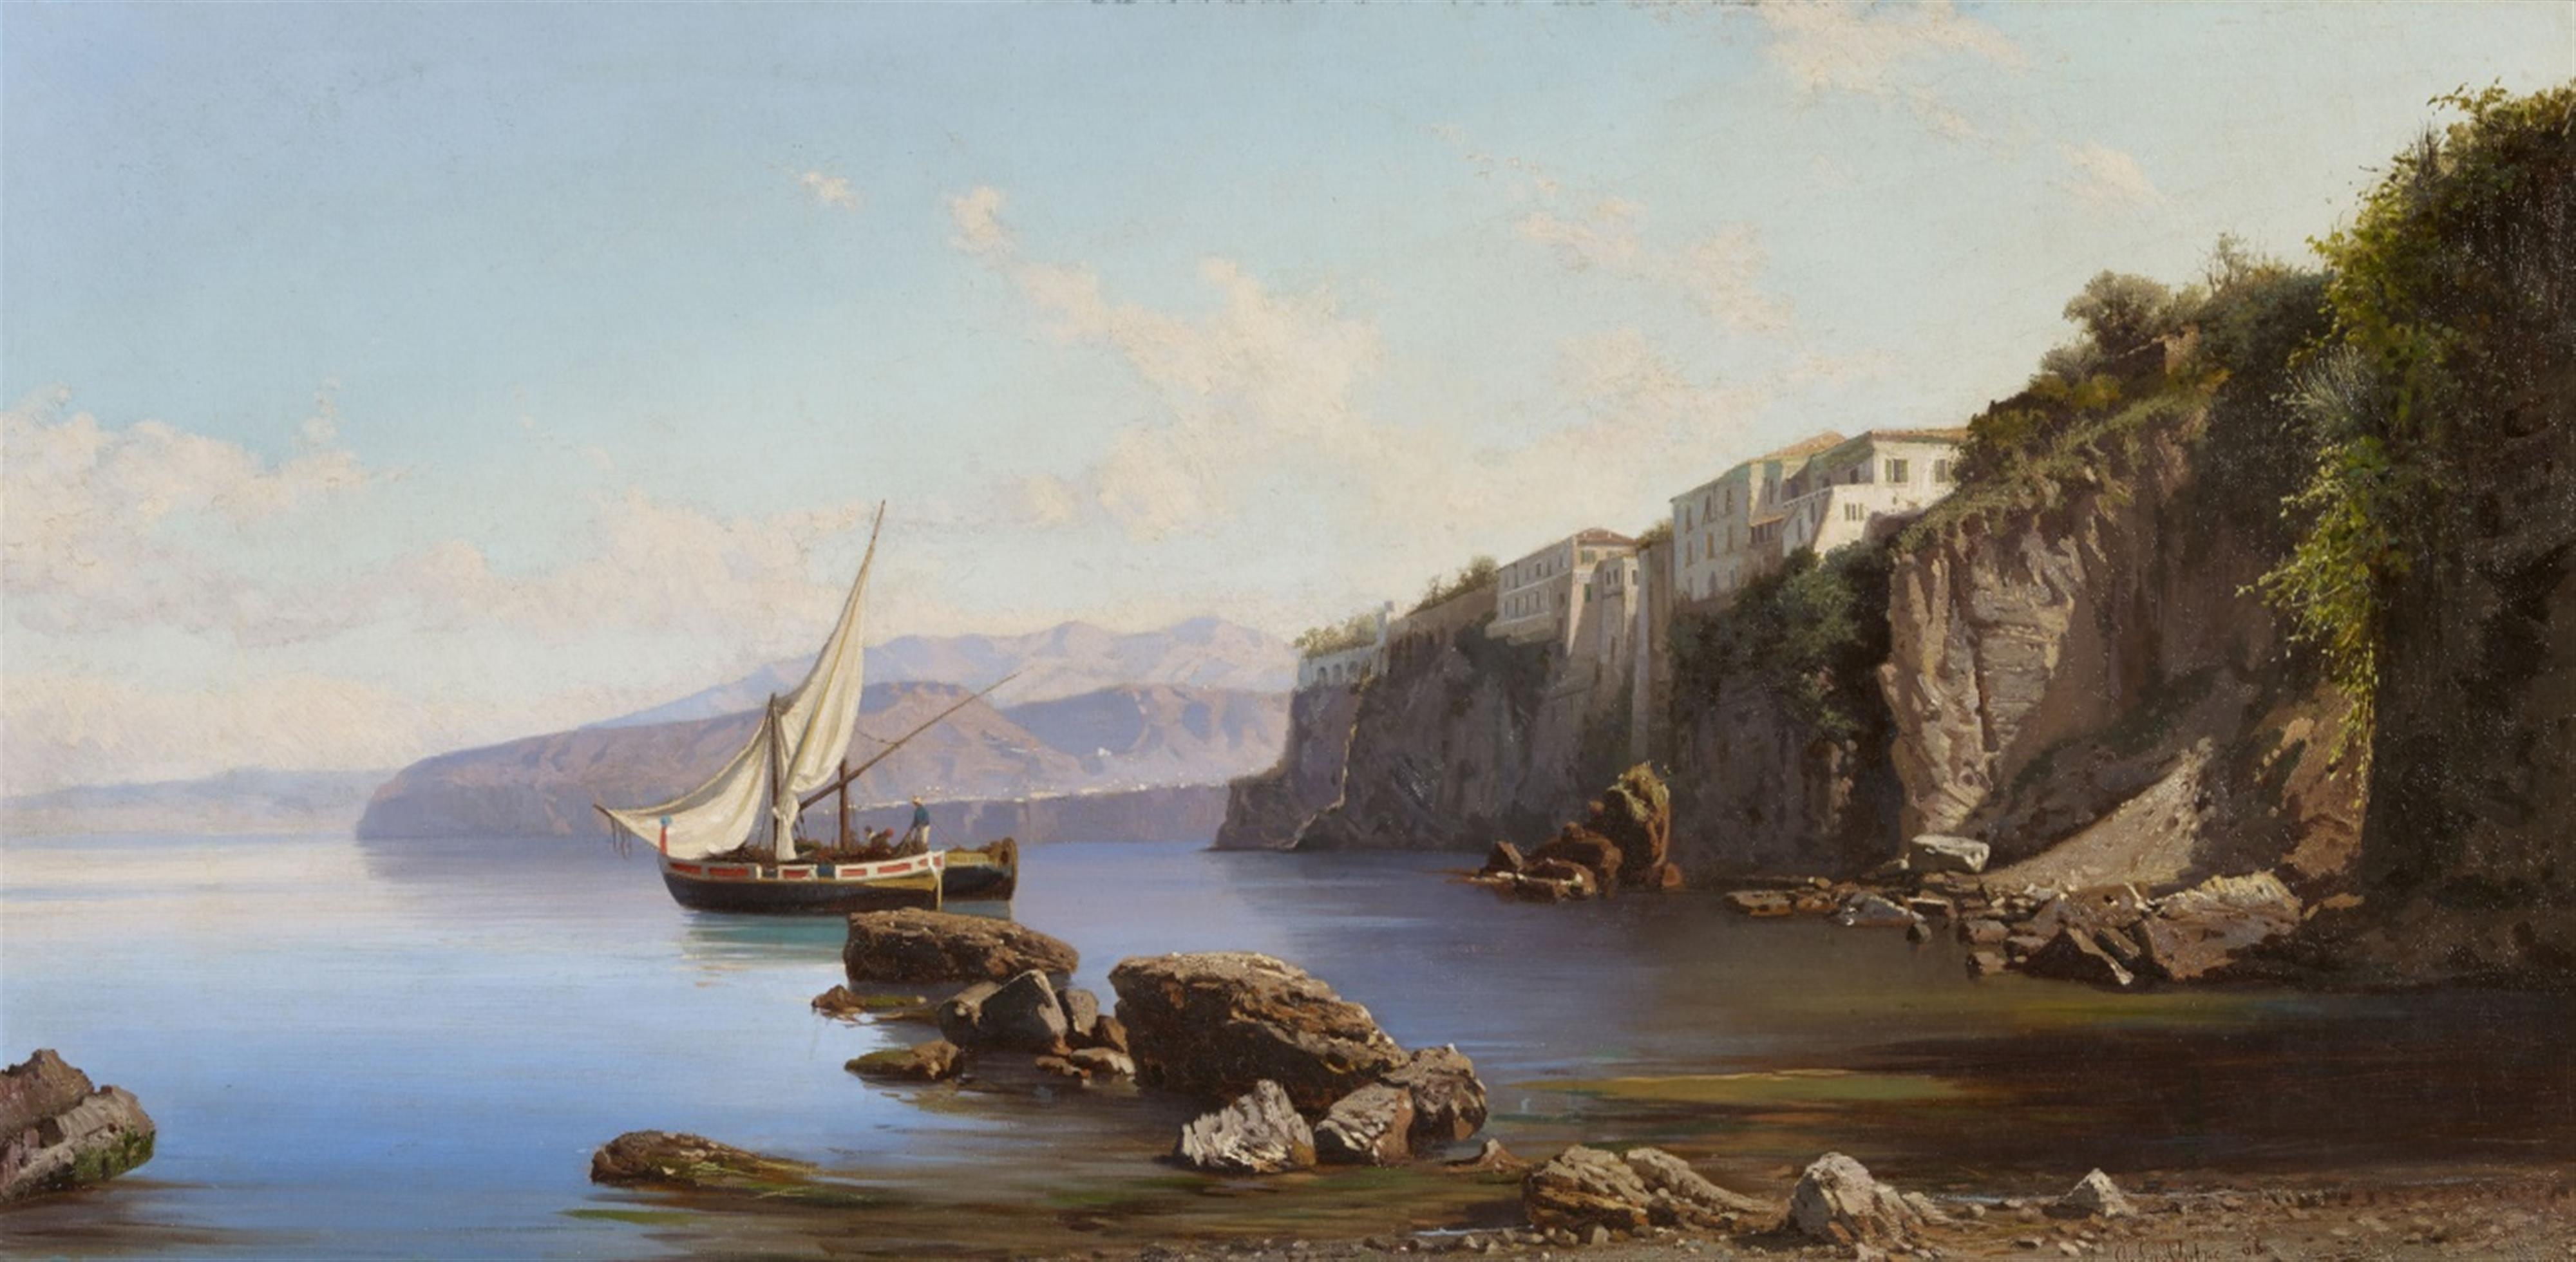 Alessandro La Volpe - A Fishing Boat in the Bay of Sorrent - image-1